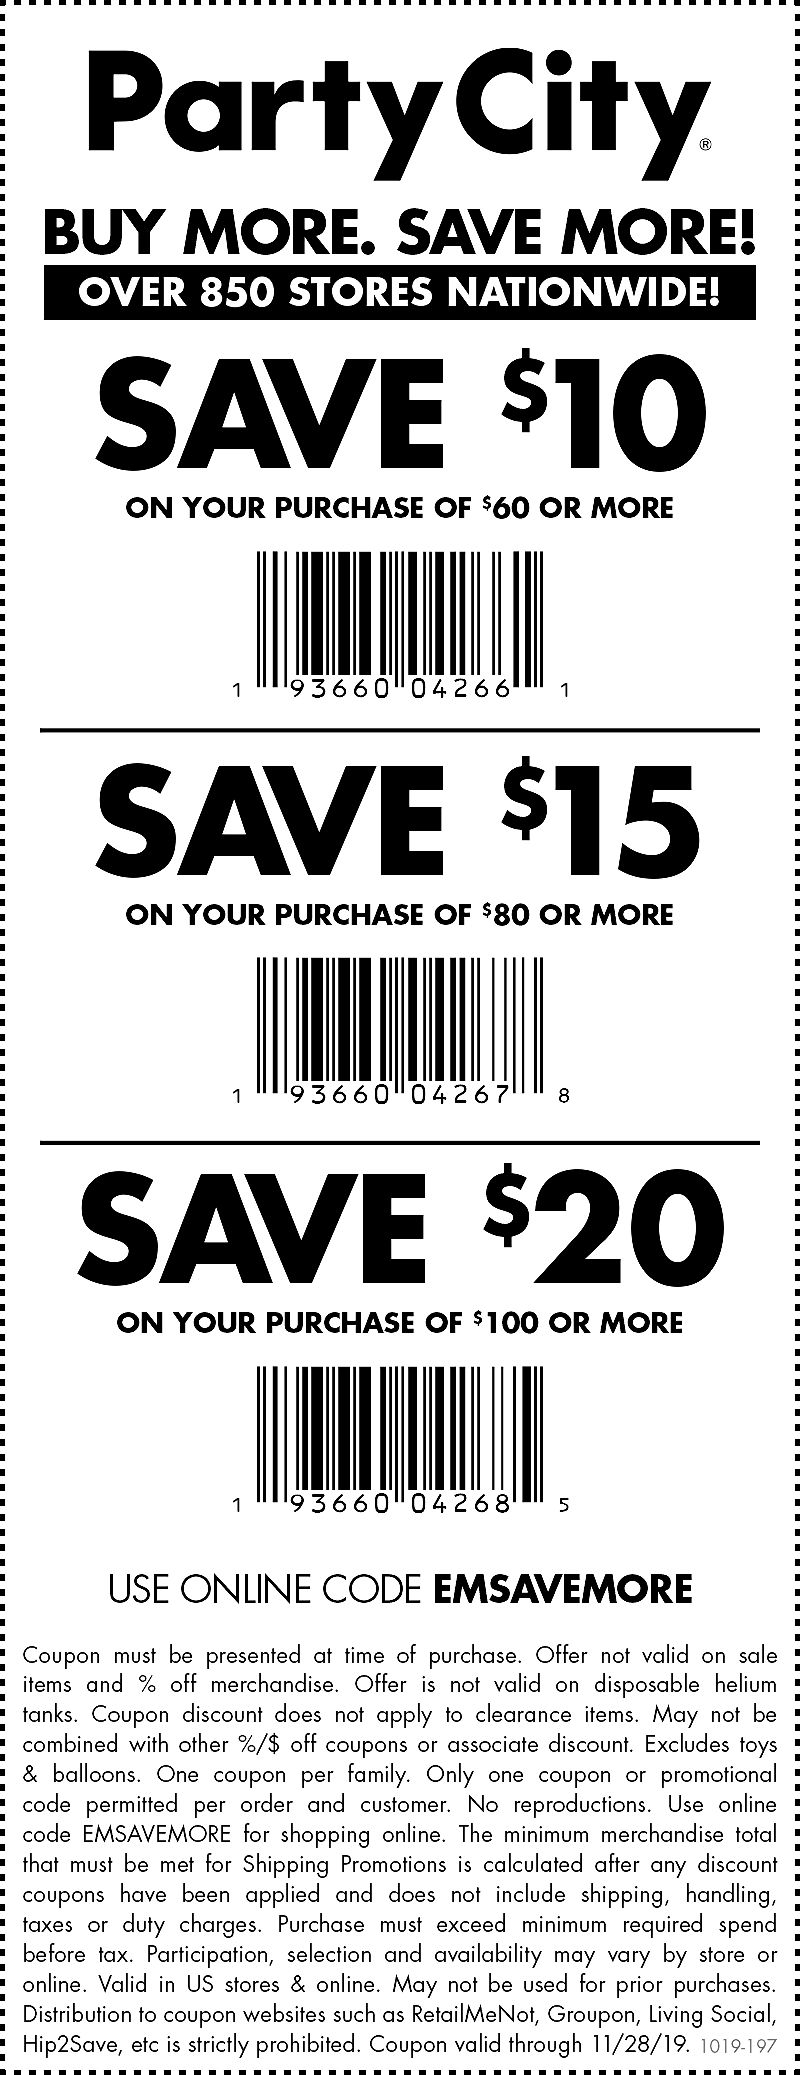 Party City coupons & promo code for [October 2022]